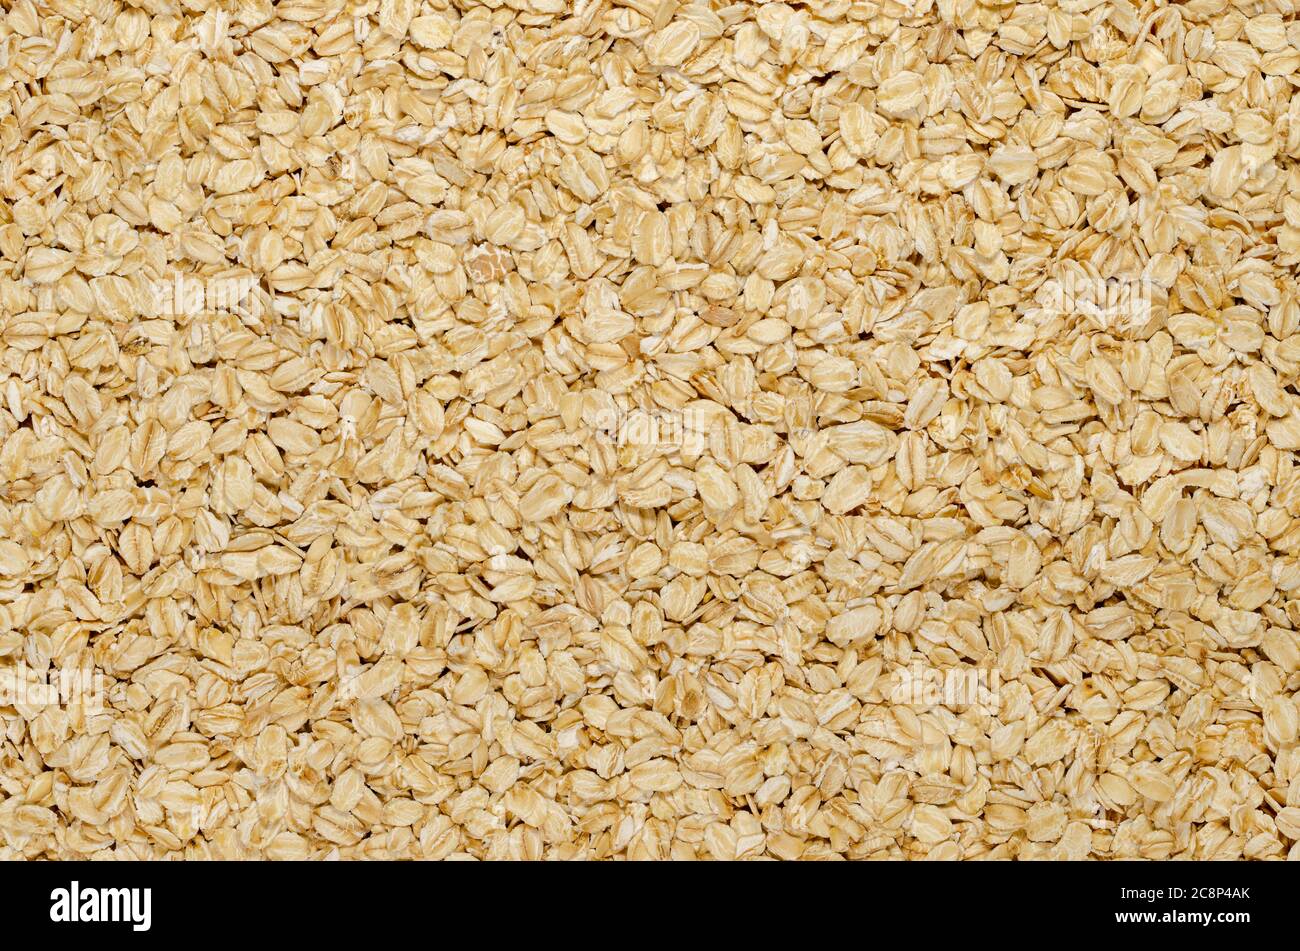 Rolled oats, surface and background. Lightly processed whole-grain food. Husked and steamed oat groats are rolled into flakes and lightly toasted. Stock Photo